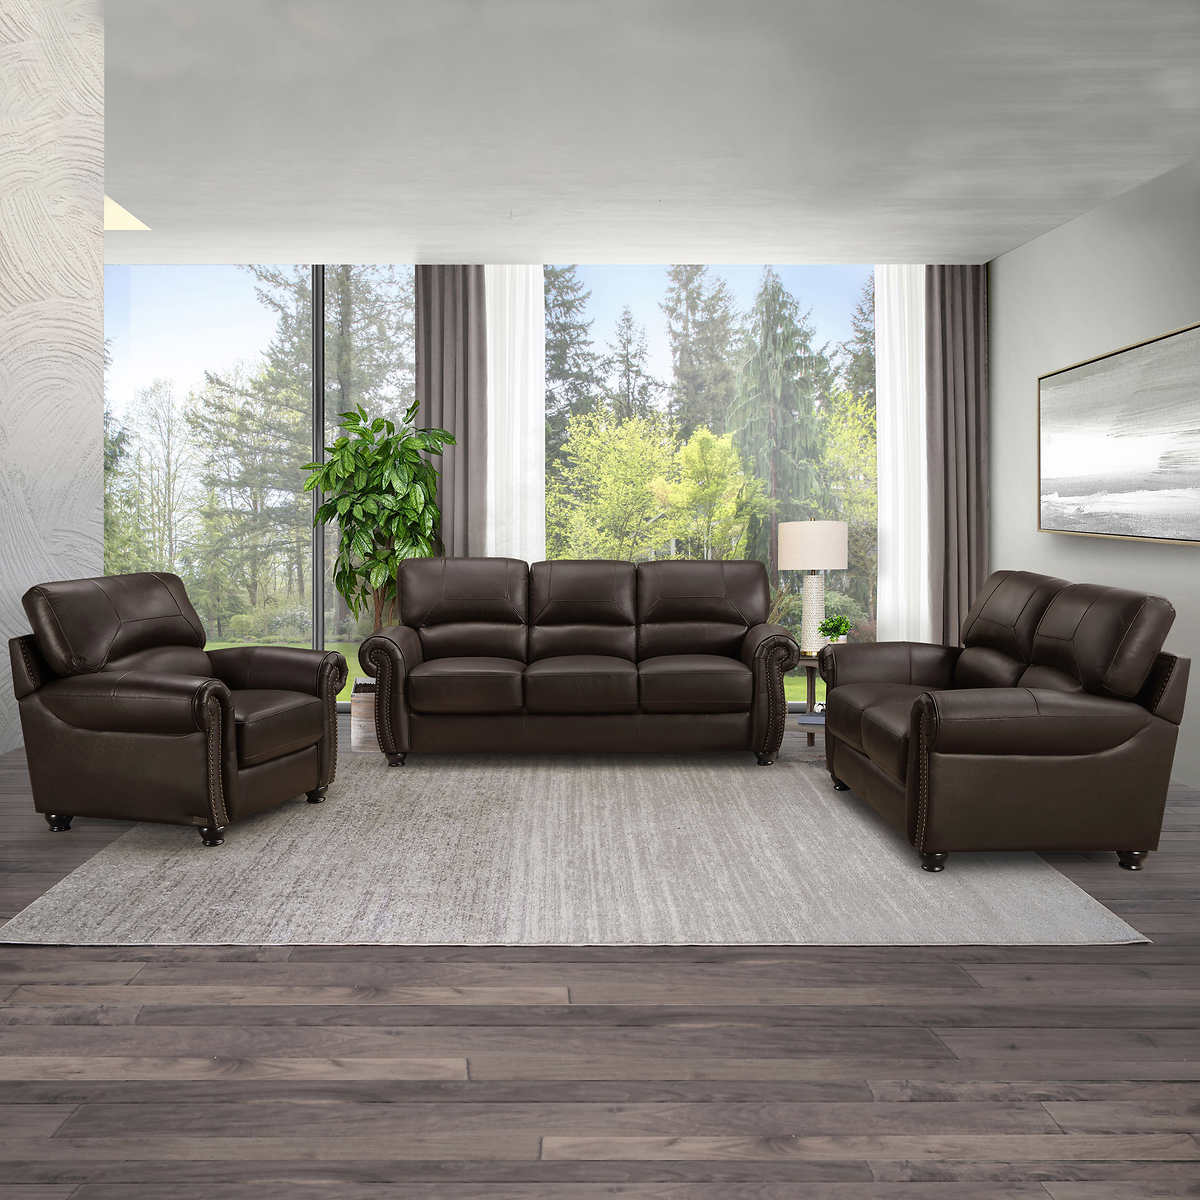 Tuscany 3 Piece Leather Living Room Set, Real Leather Living Room Sets